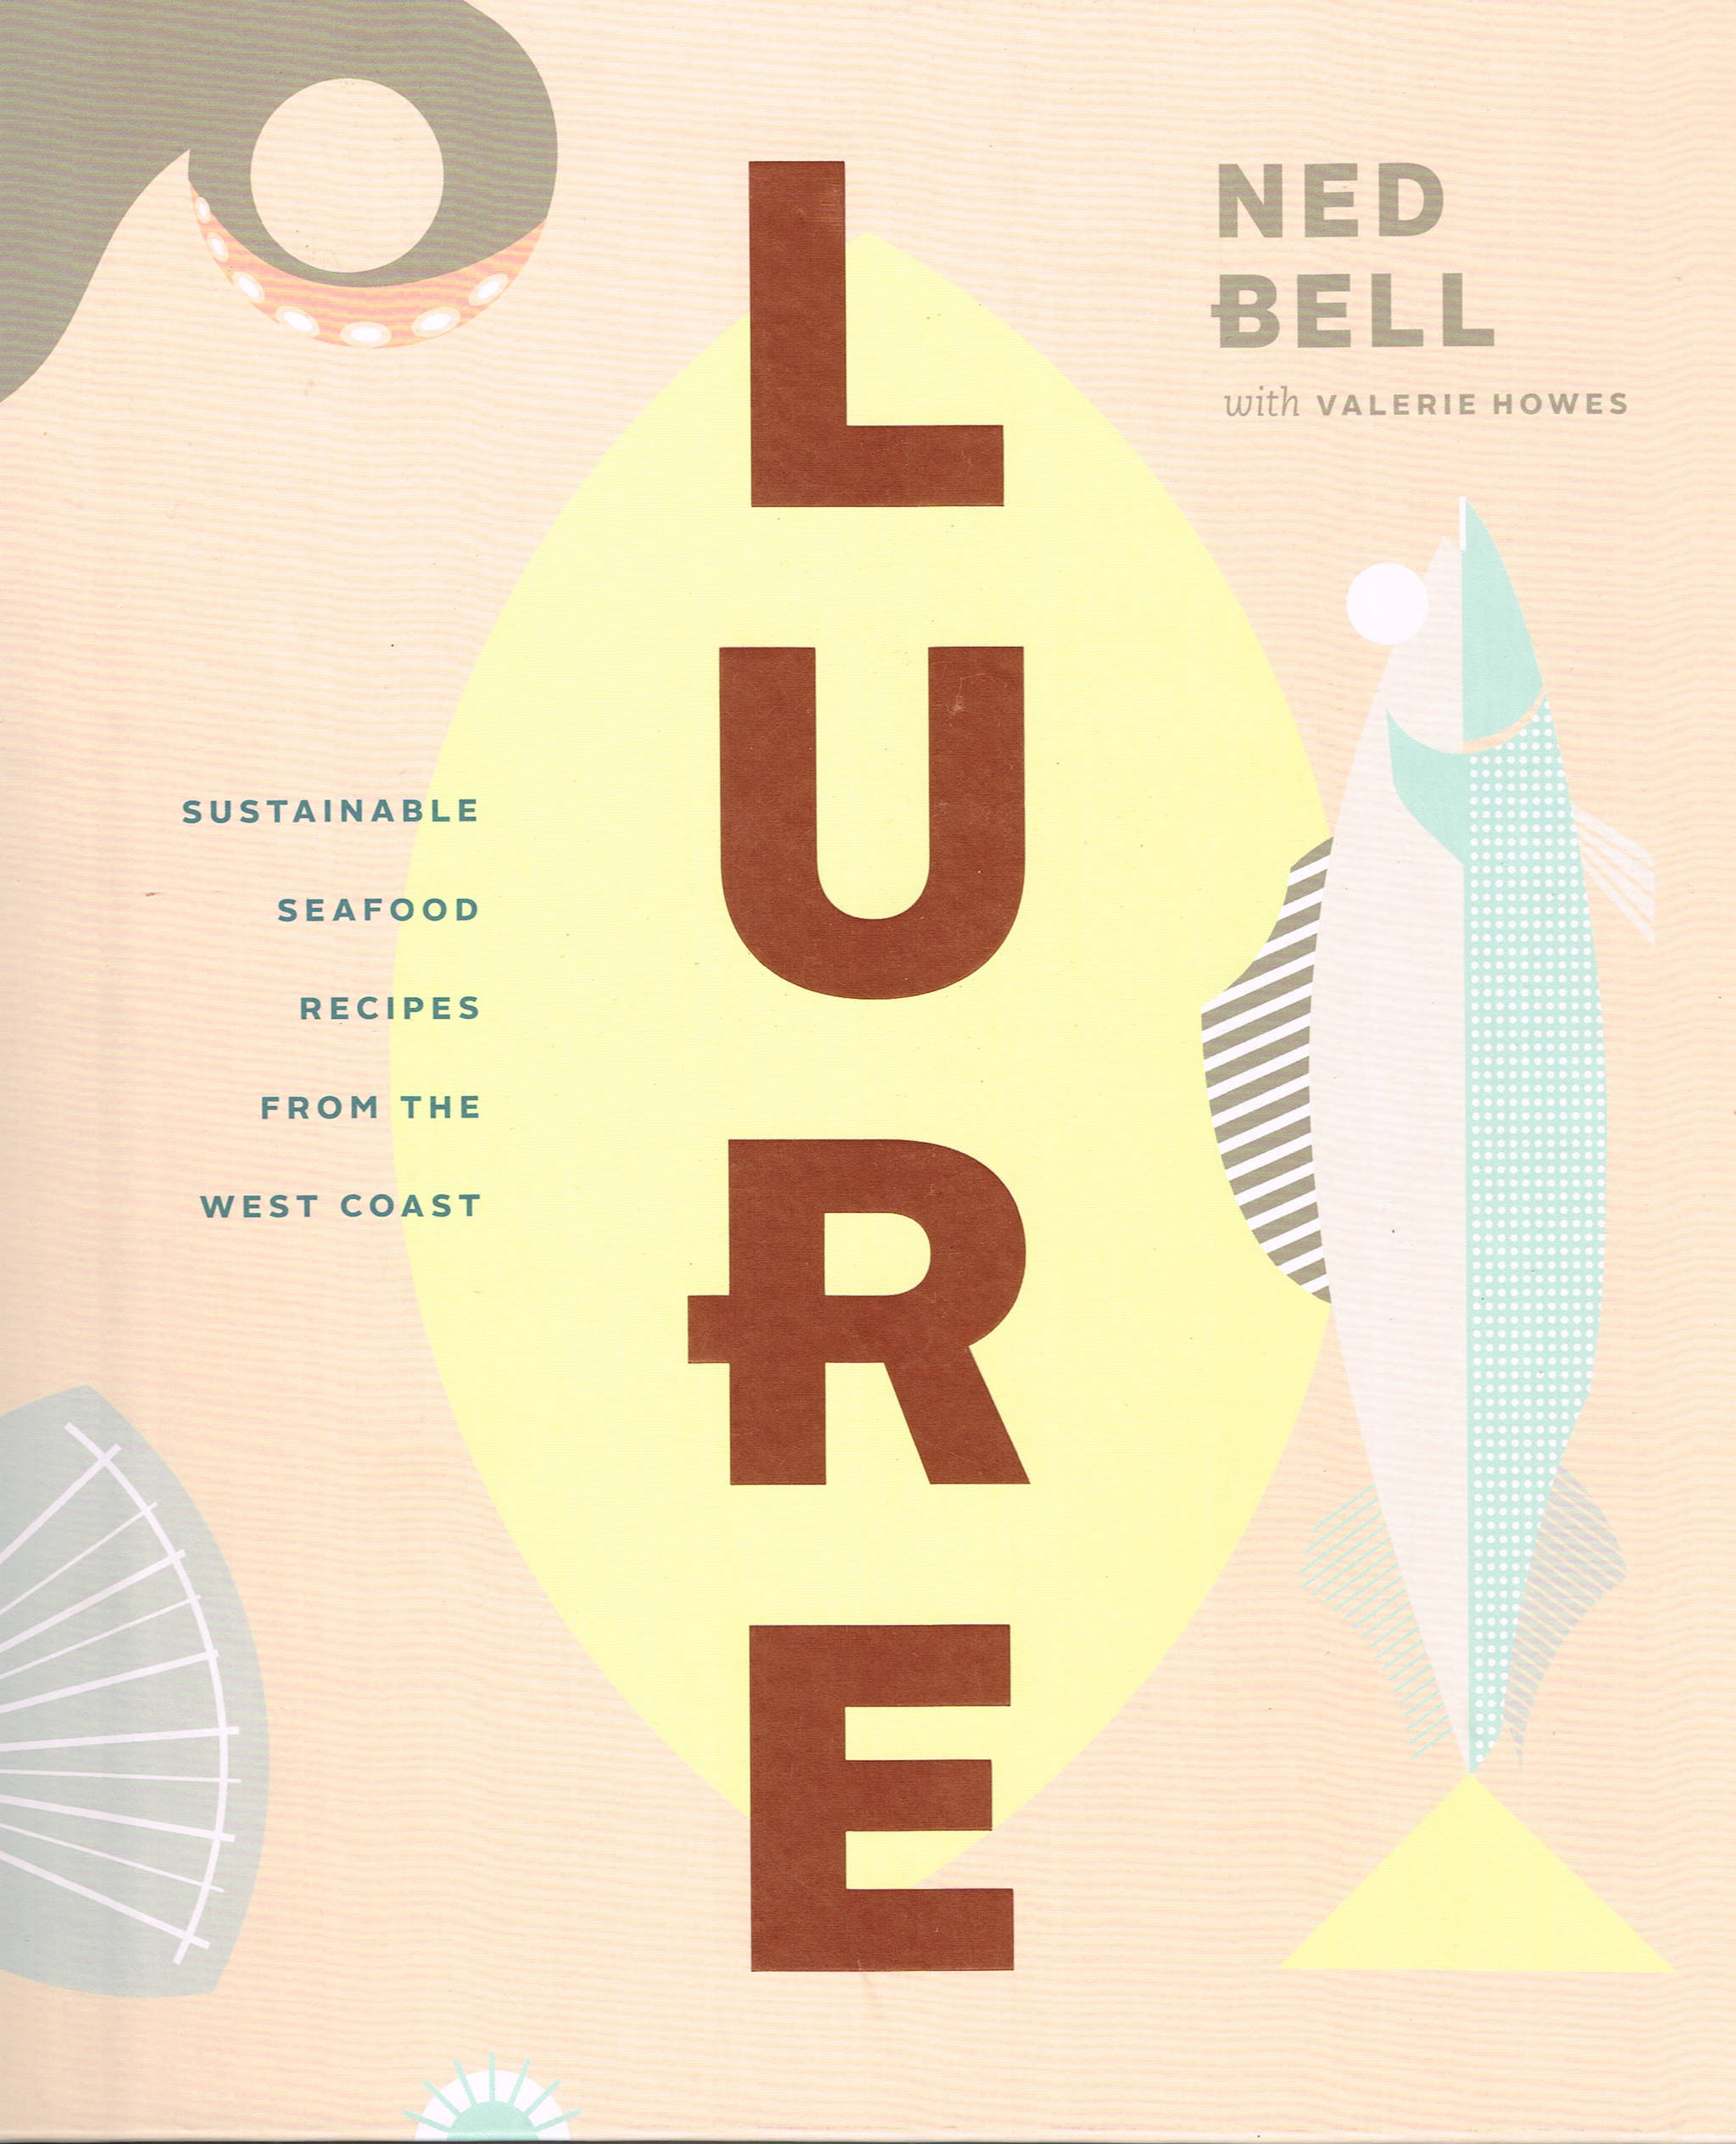 11866664_web1_Ned-Bell-Recipe-book-Lure